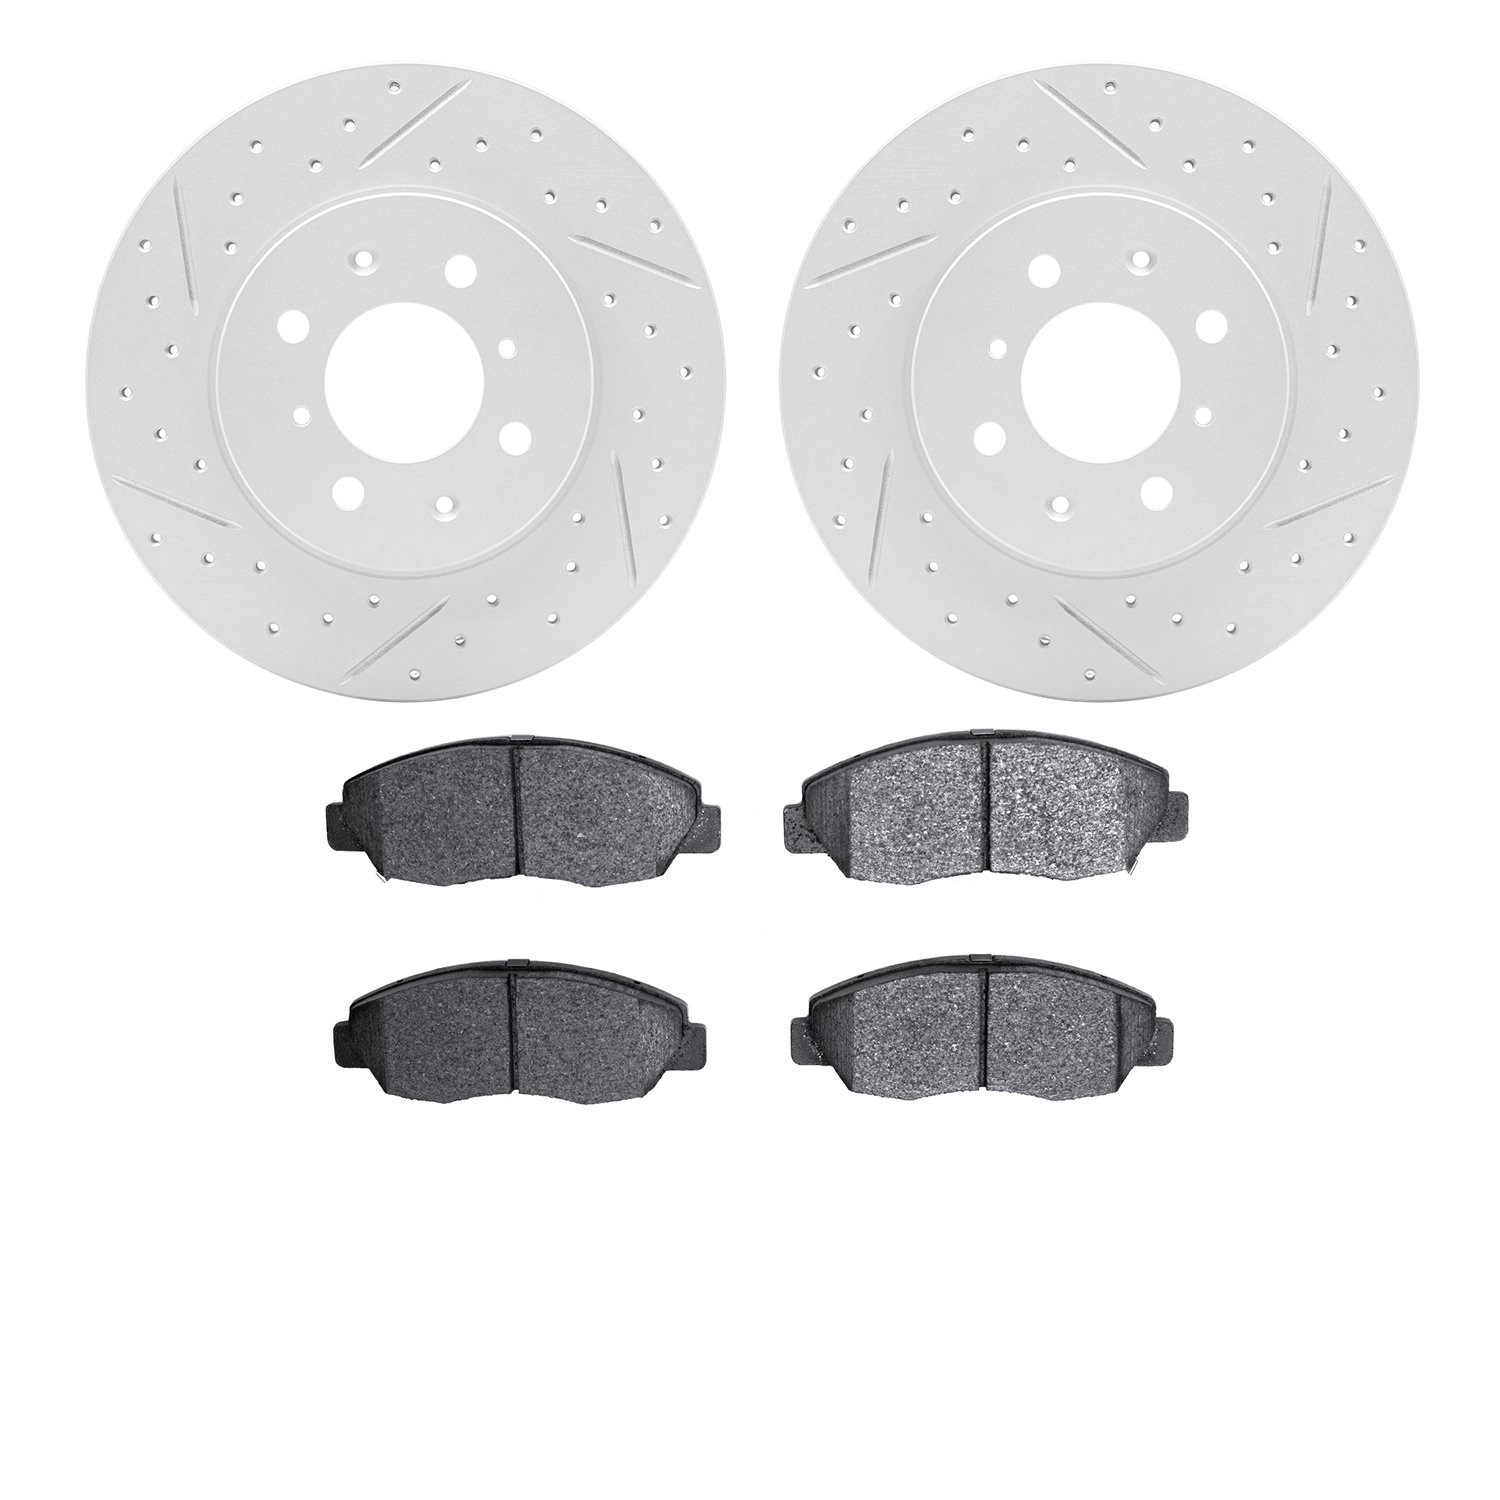 2502-59012 Geoperformance Drilled/Slotted Rotors w/5000 Advanced Brake Pads Kit, 1996-2014 Acura/Honda, Position: Front